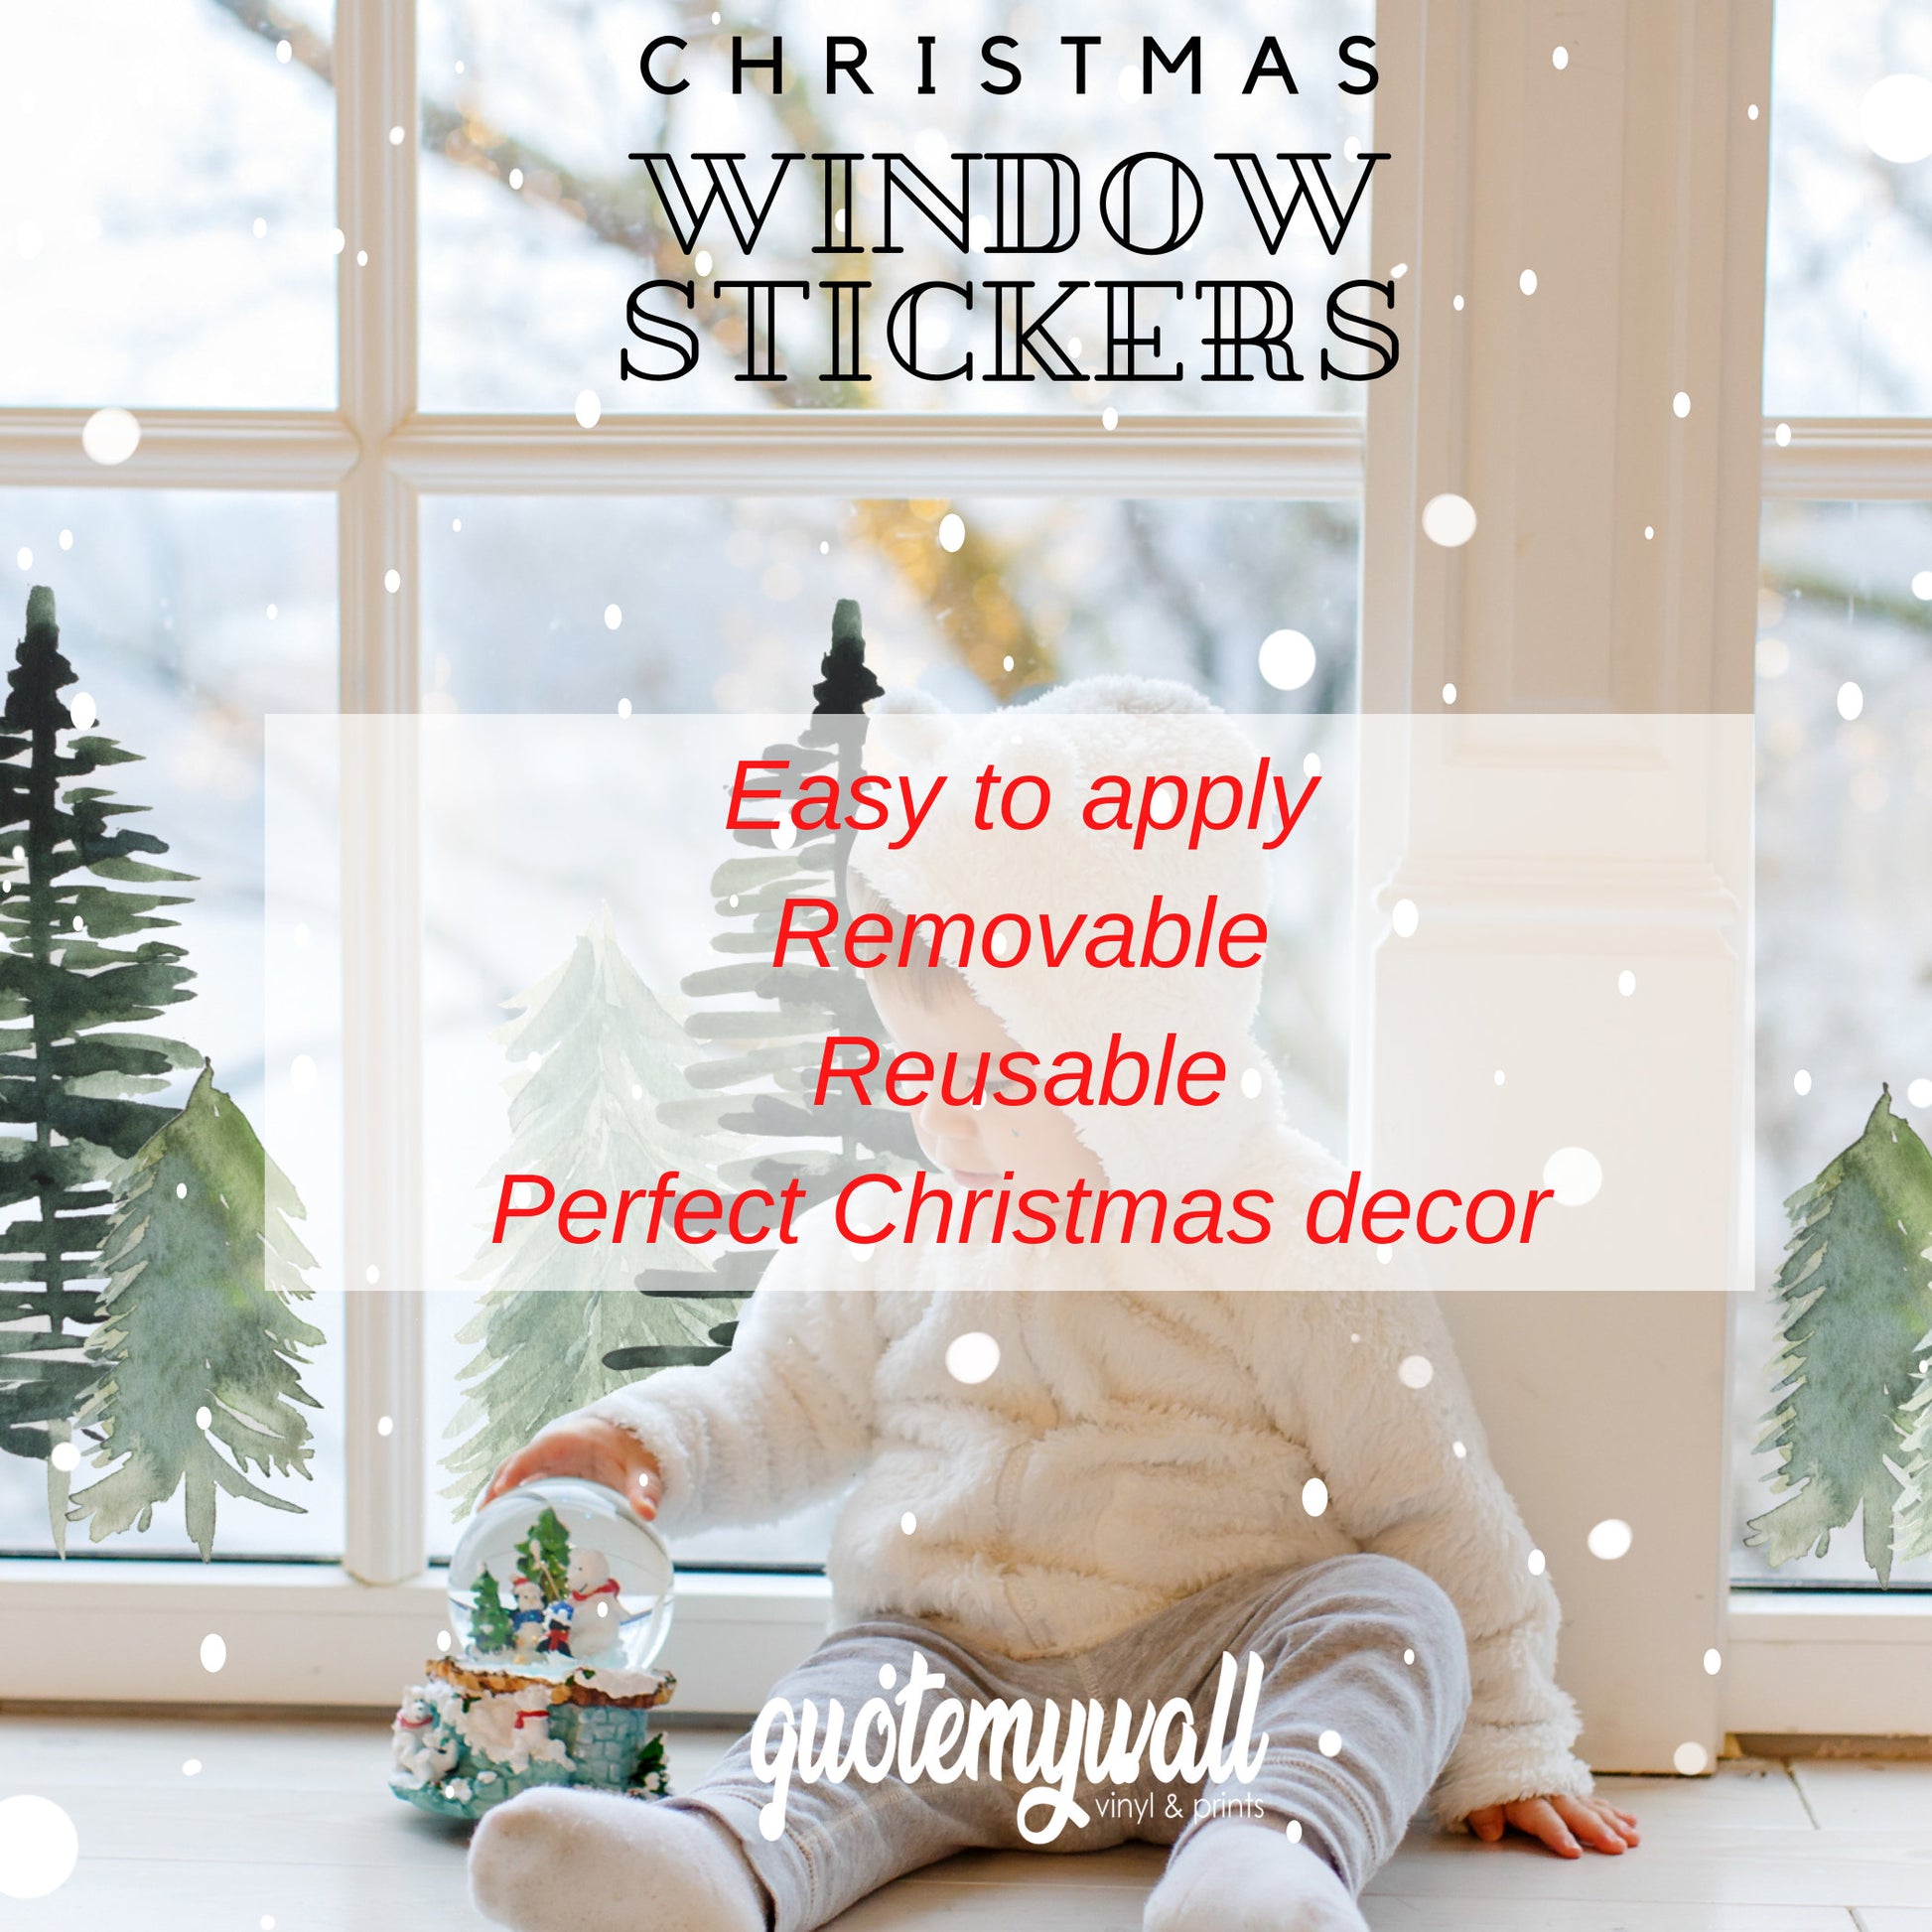 16 Christmas Window Decals, Candy Cane Stickers, Candy Stick Decor, Xmas Decorations, Holioday Decor, Removable & Reusable